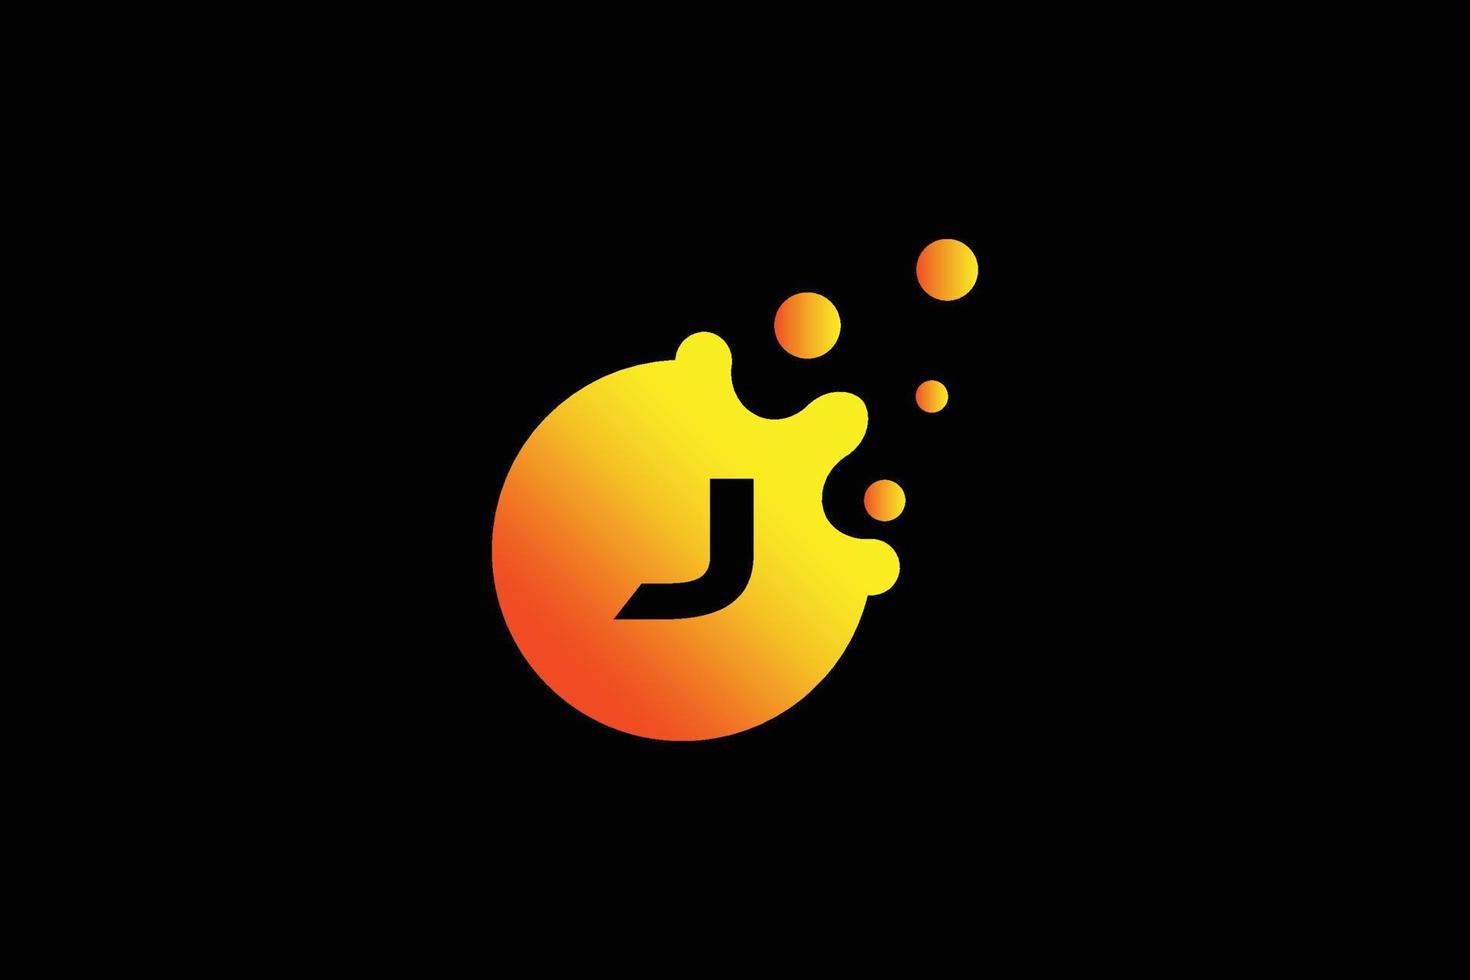 Letter J logo . J letter design vector with dots vector illustration . Letter mark logo with orange and yellow gradient.